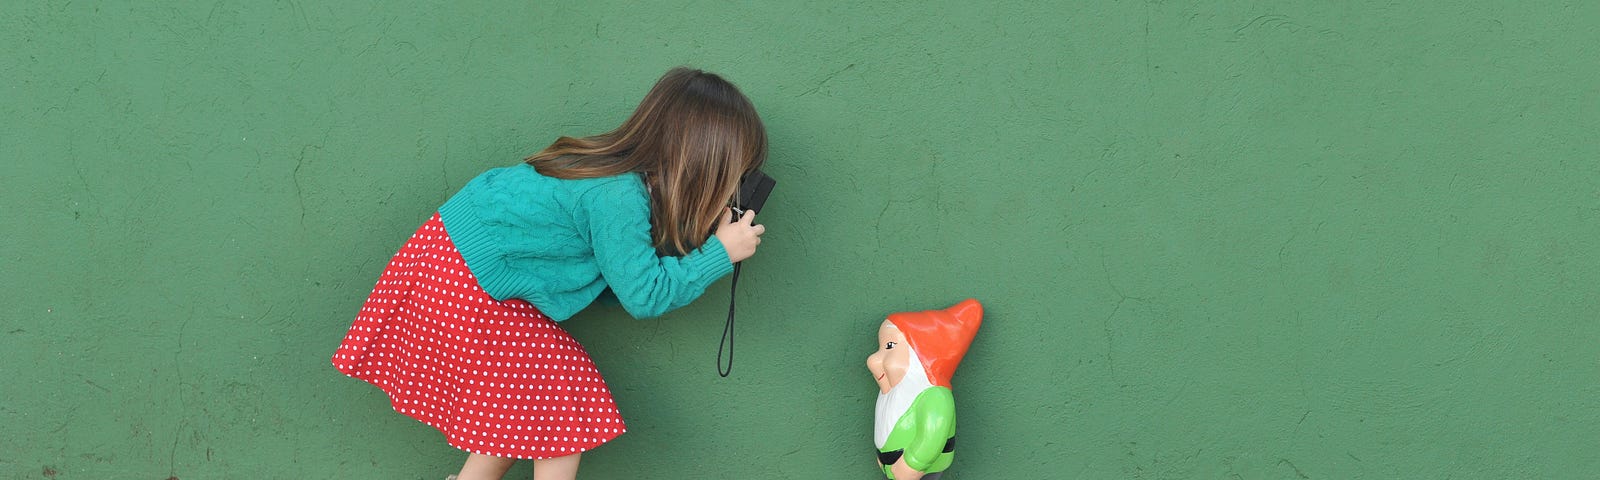 A little girl in a green sweater and polka dot skirt taking a photo of a happy gnome.